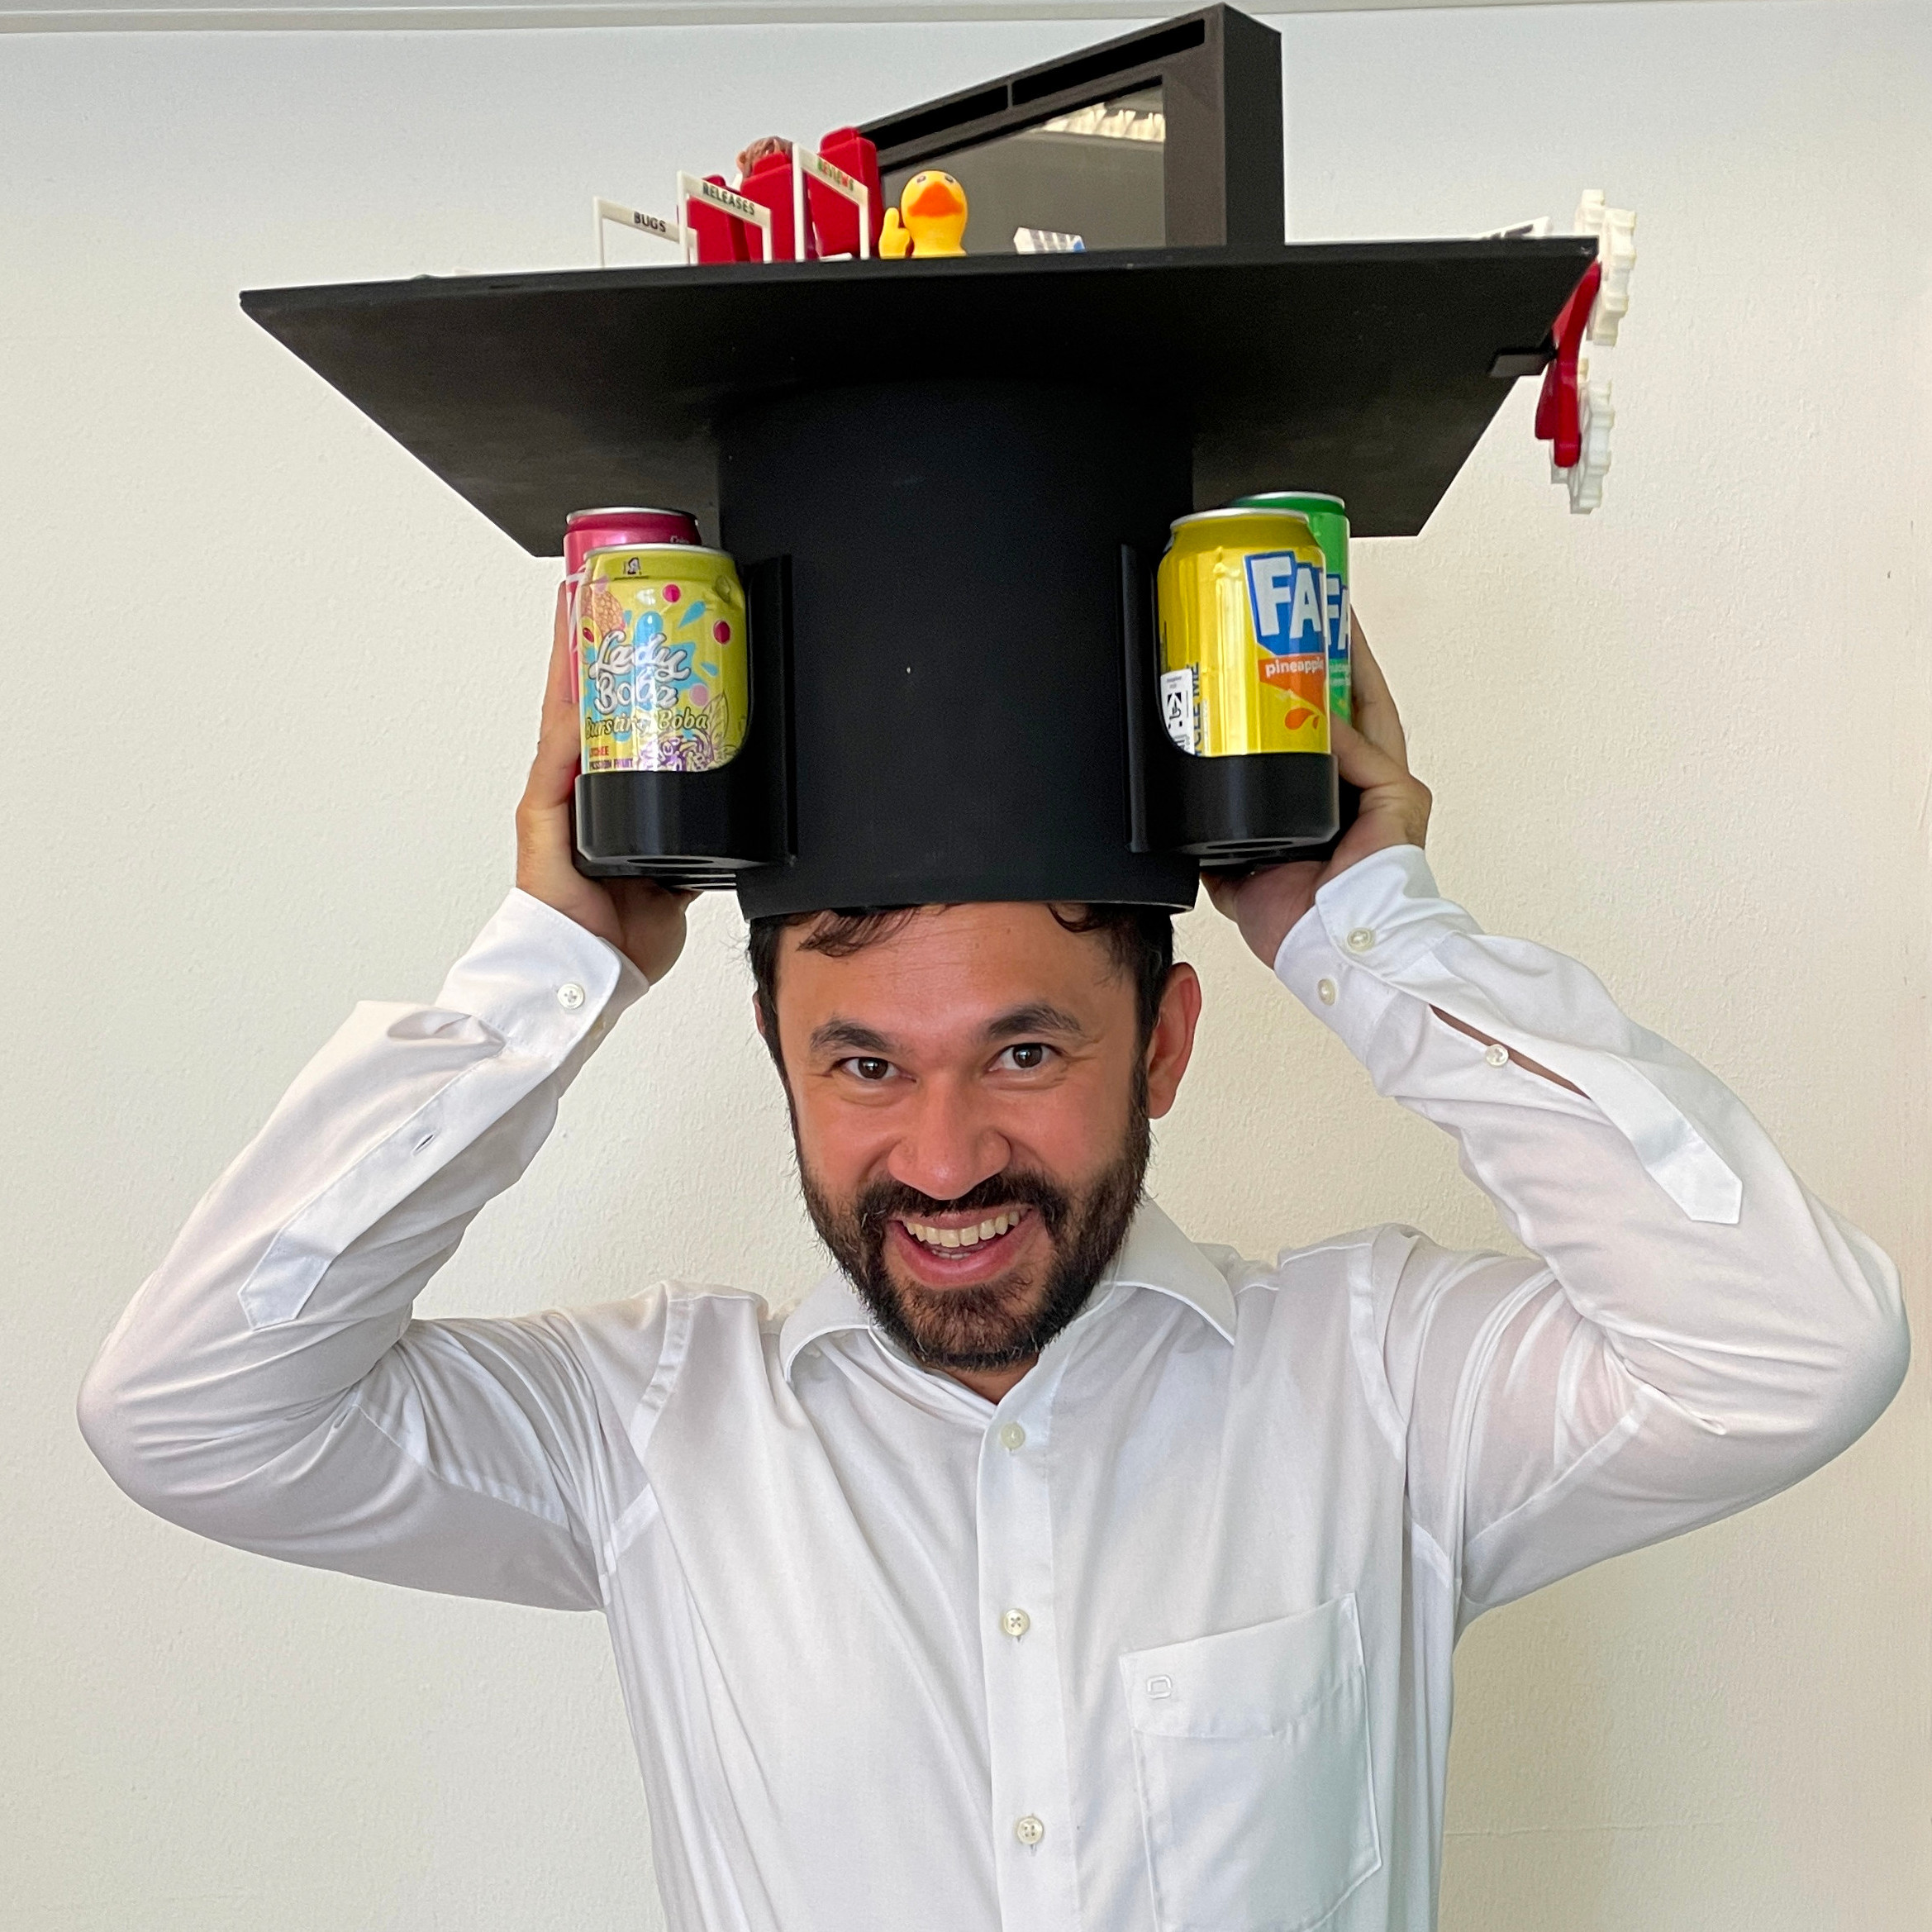 Heartfelt Congratulation to Oliver Wolf on His Successful Doctoral Examination